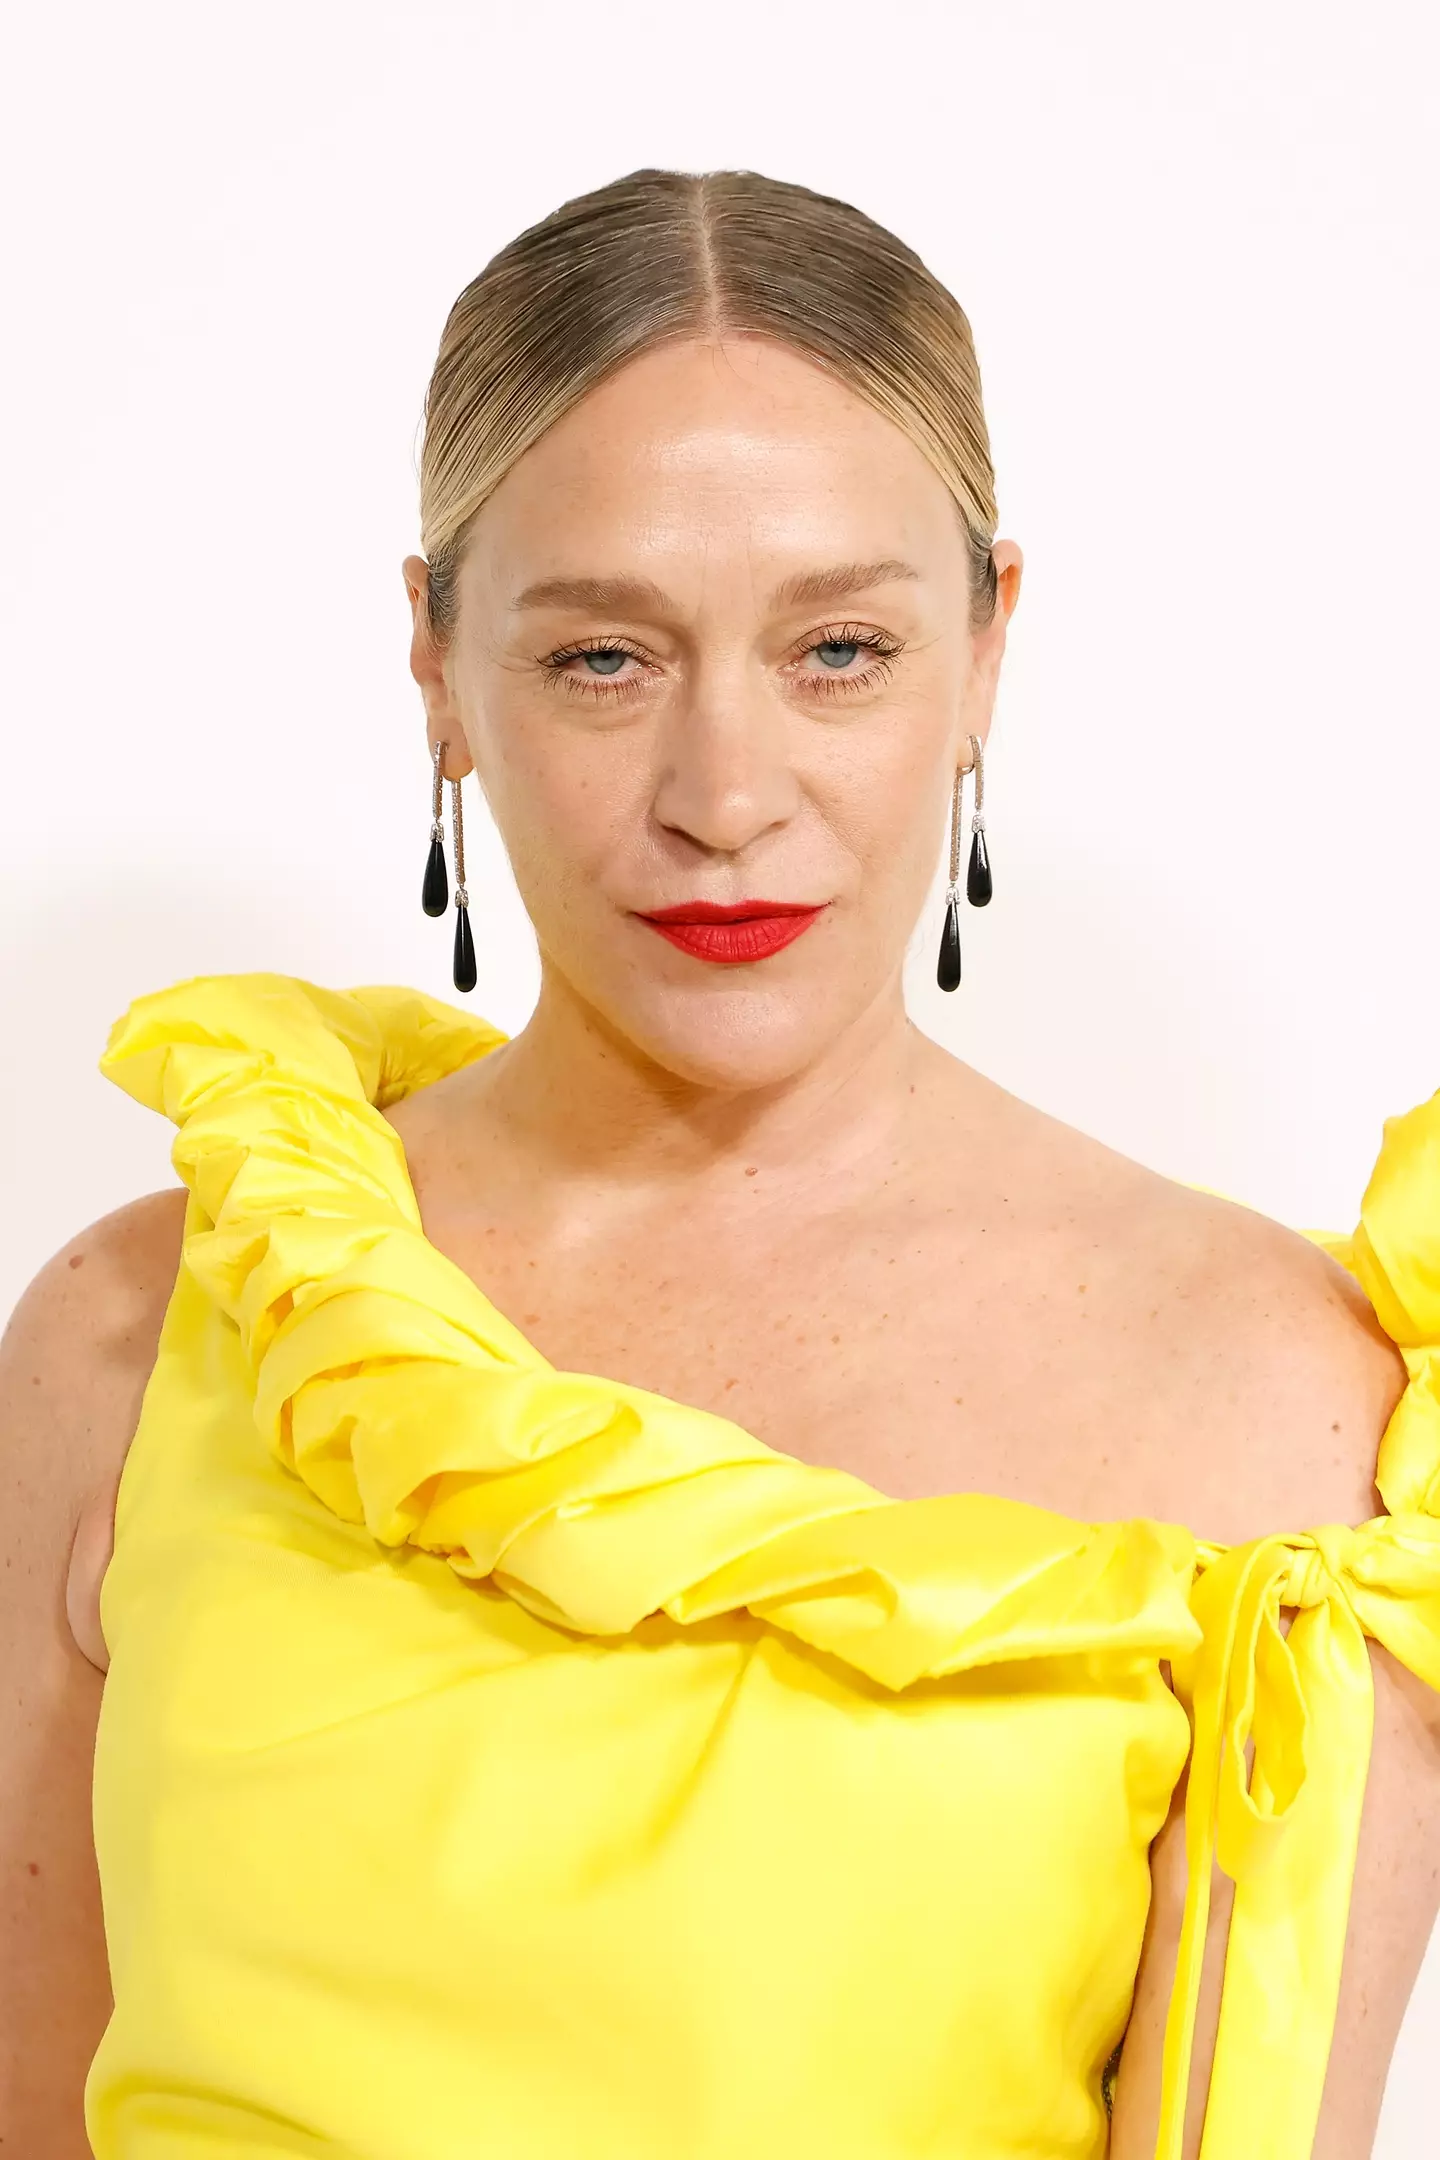 Chloe Sevigny said that she felt 'insecure' when she made the film.